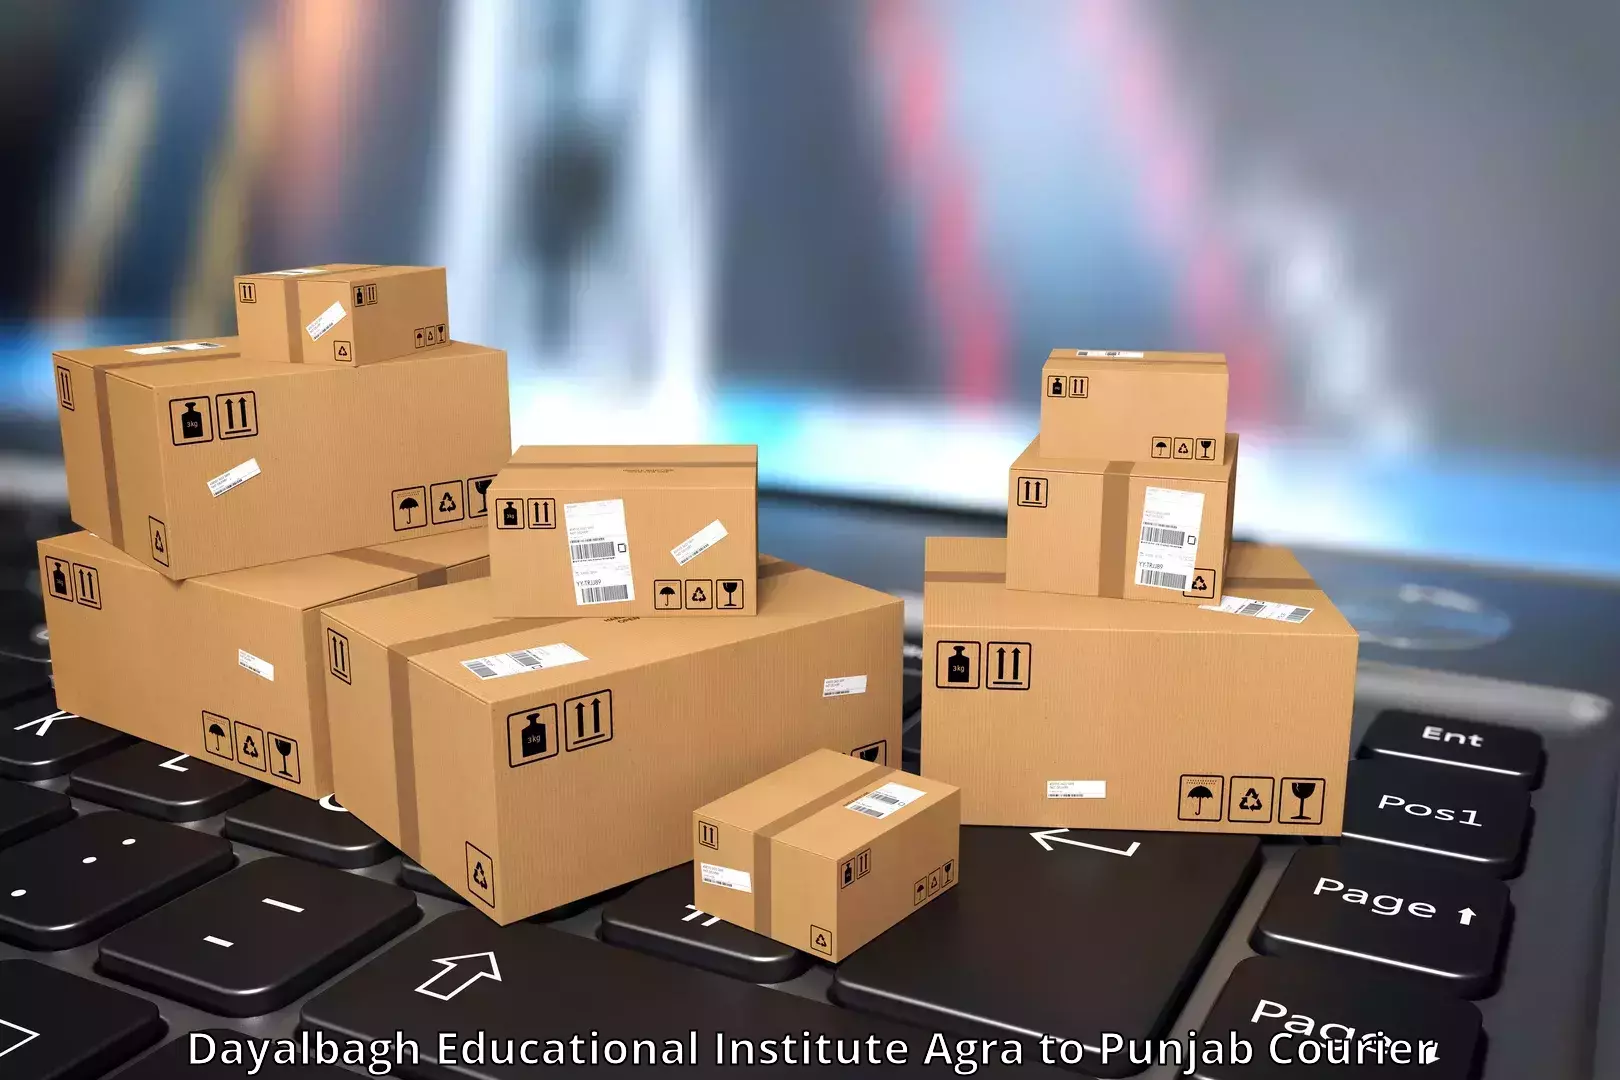 Advanced courier platforms Dayalbagh Educational Institute Agra to Punjab